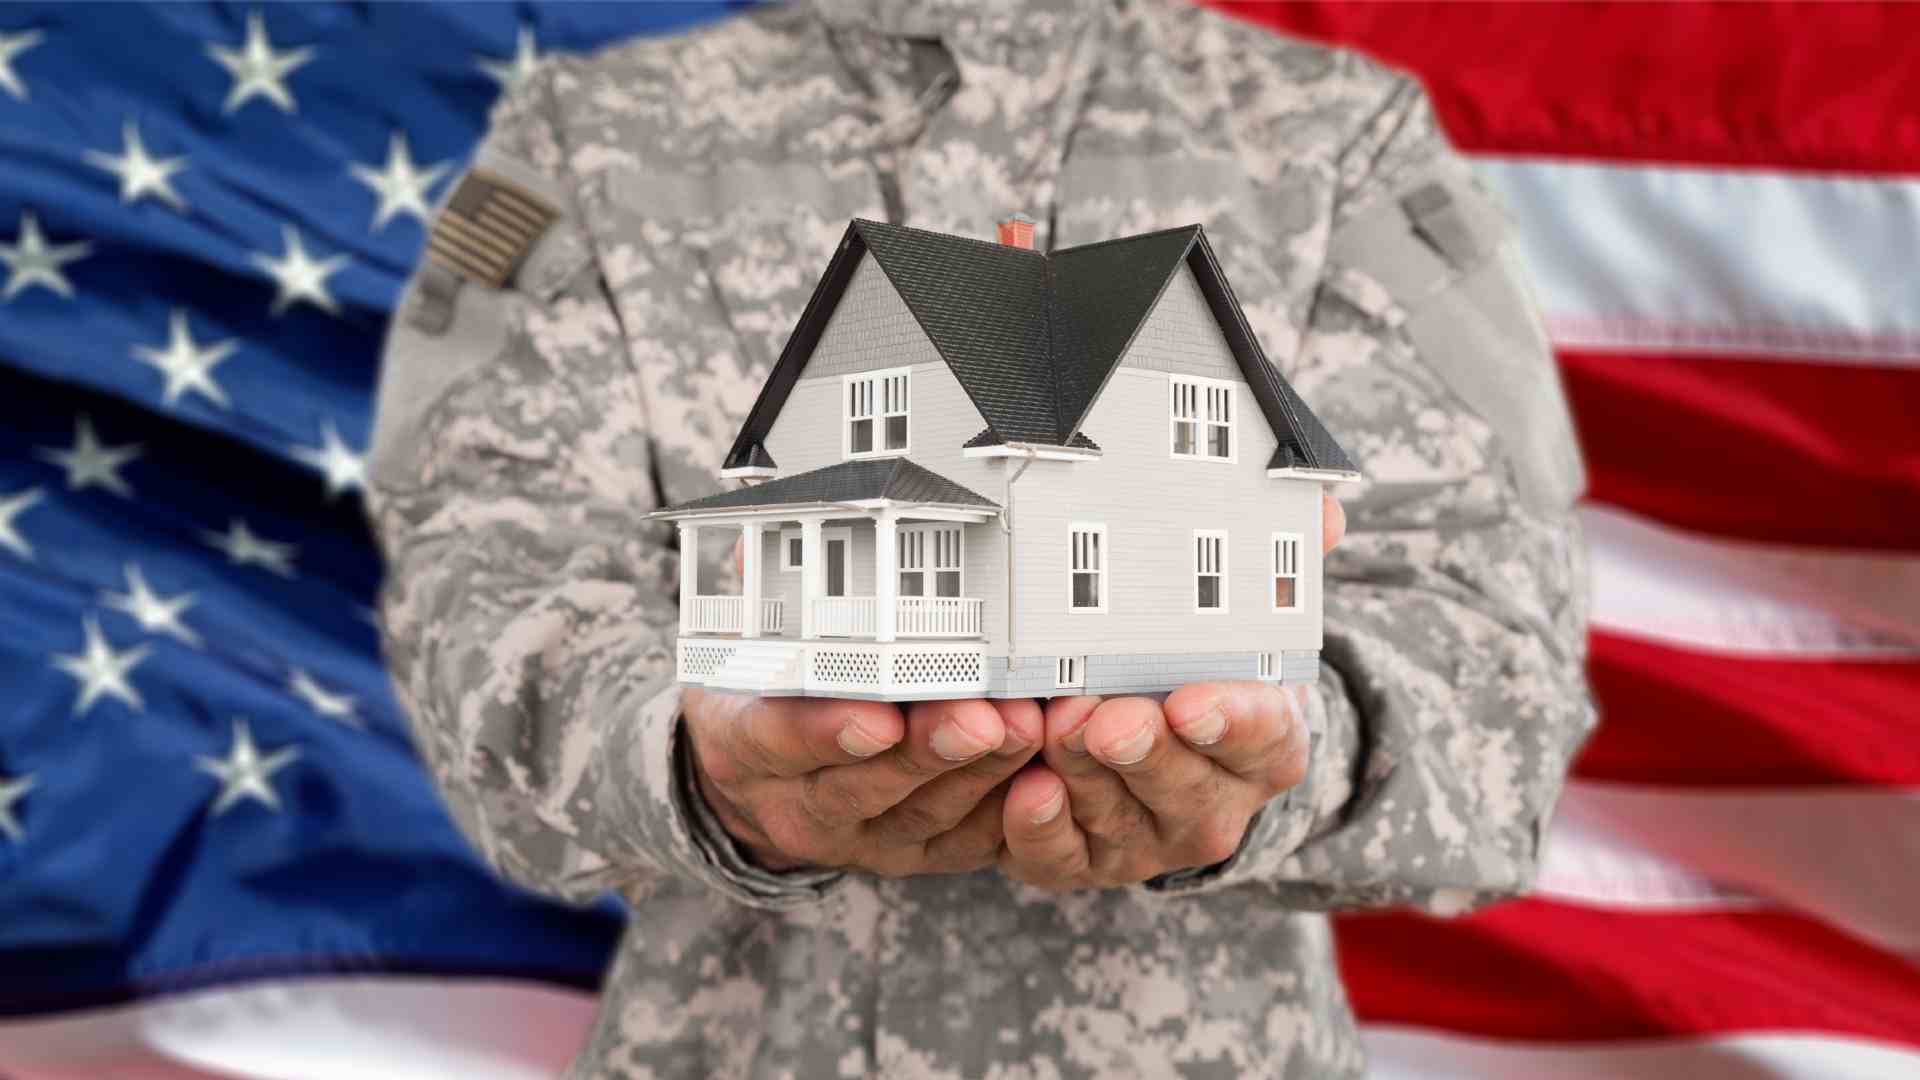 types of properties you can purchase with a VA home loan